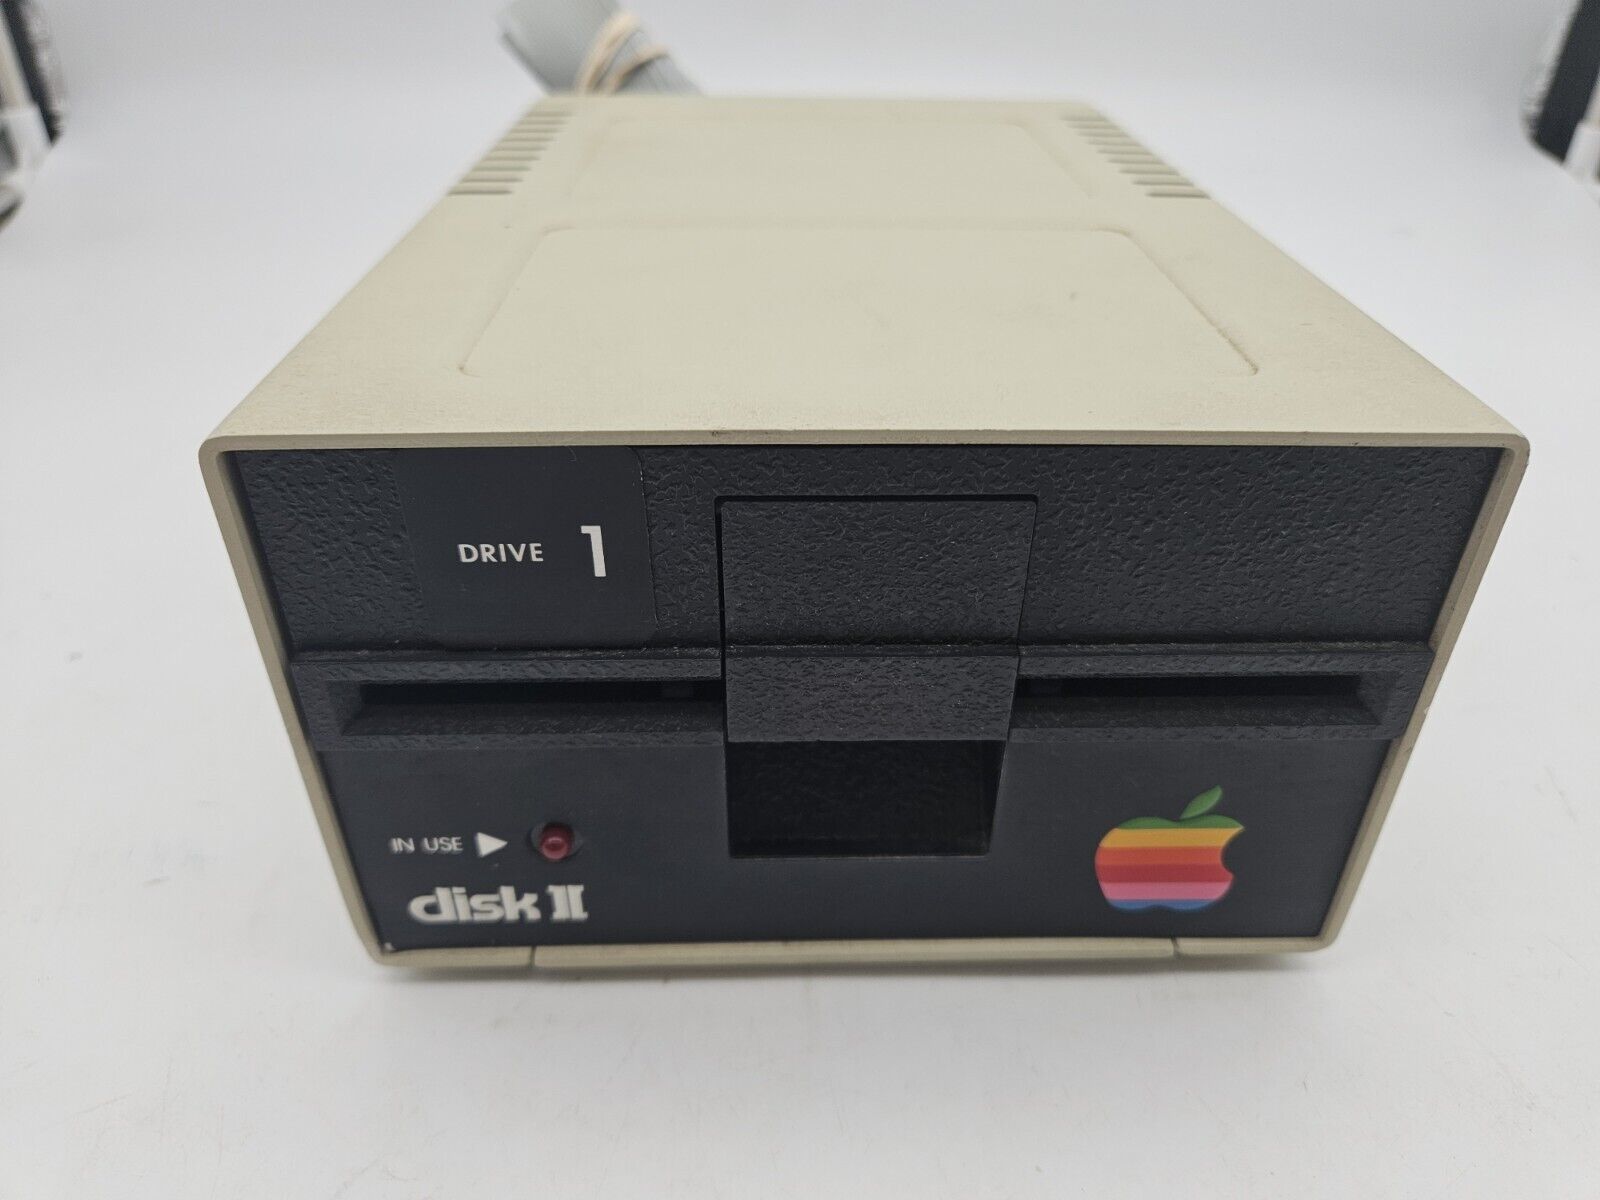 Vintage Apple A2M0003 Disk II 5.25” Floppy Disk Drive - Untested As Is